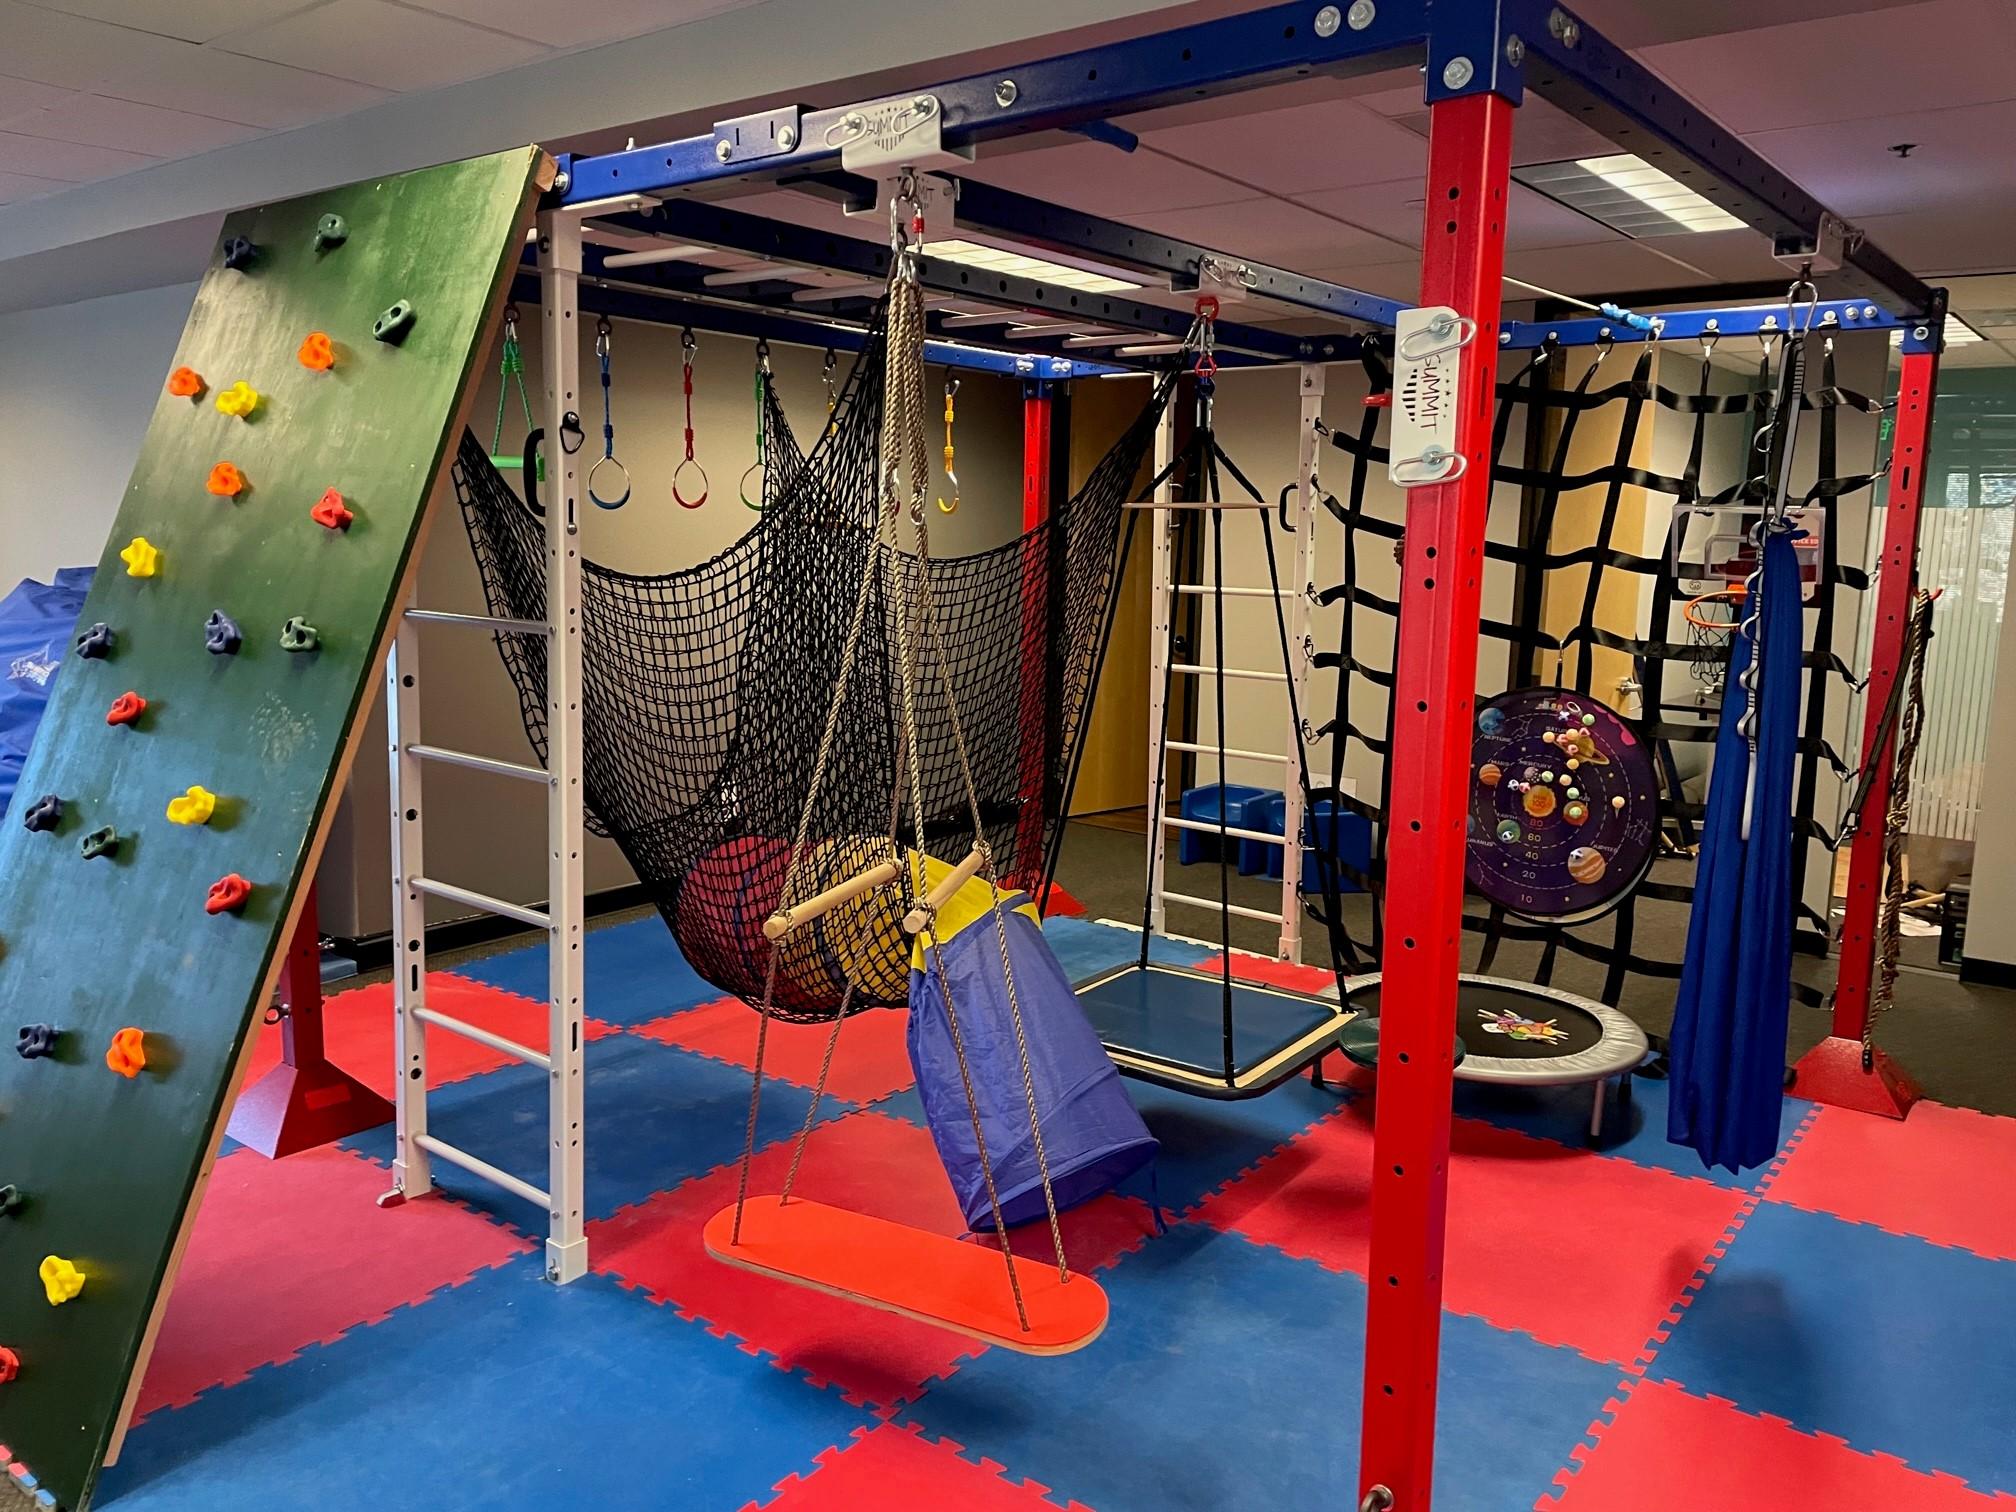 Summit Sensory Gym State-of-the-art freestanding sensory gym designed to be used in a commercial setting. Summit Sensory Gym works with some of the largest organizations in the world that provide pediatric therapy services. Our clients include; hospitals, schools, ABA clinics, pediatric therapy clinics, recreation centers, stadiums, non-profits, and so many more. Learn more about our sensory gyms at www.summitsensory.com